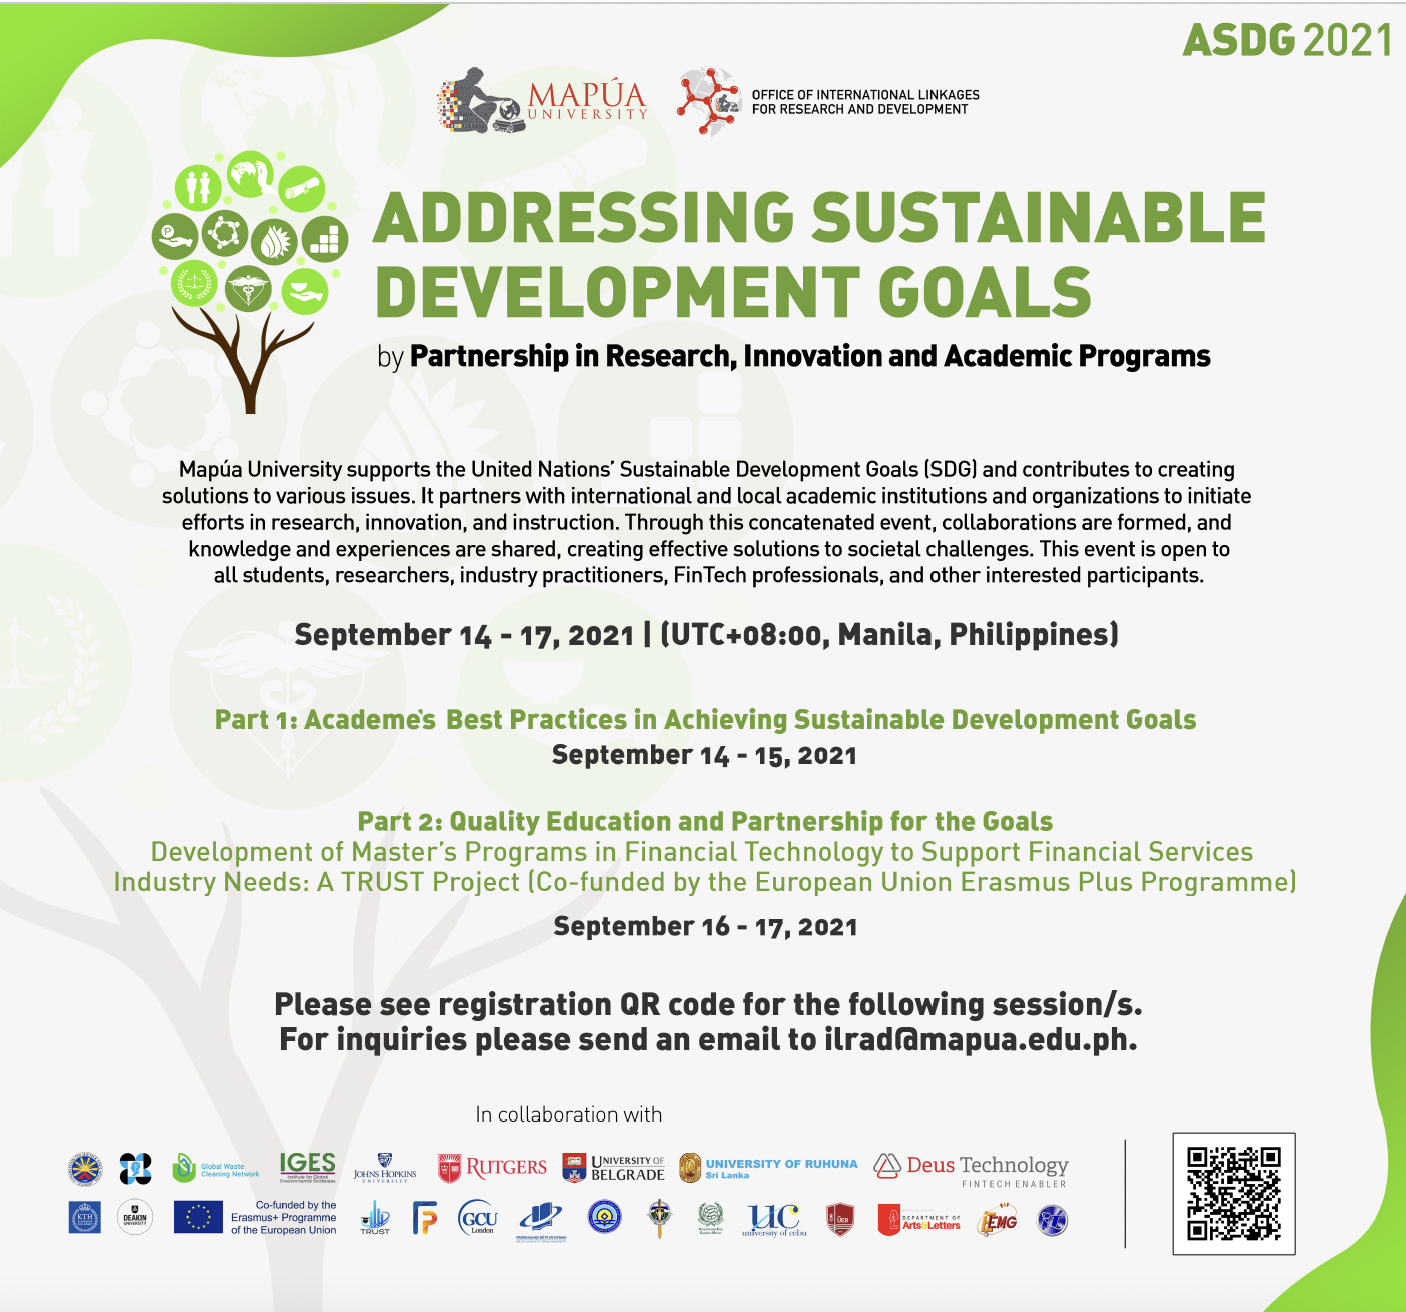 TRUST Project’s Philippine partners to host national event on September 14-17